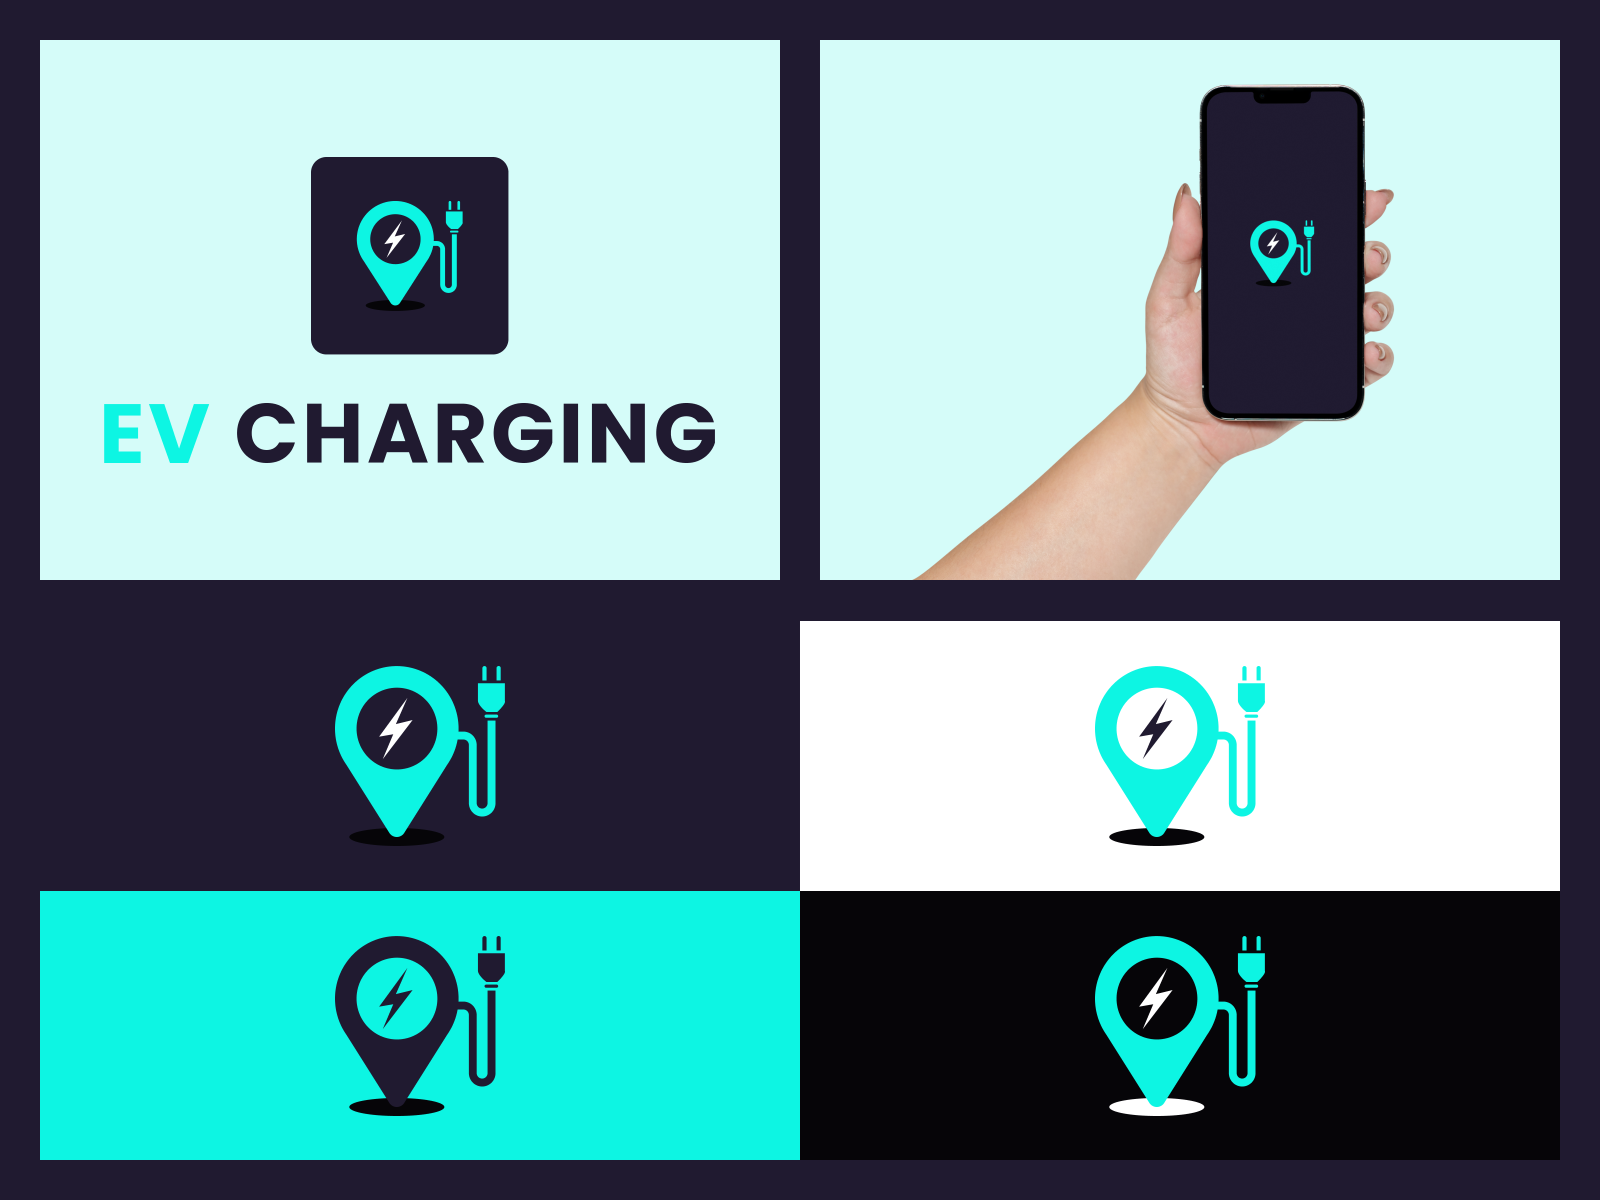 Power up with the top EV charging experts - National Car Charging.